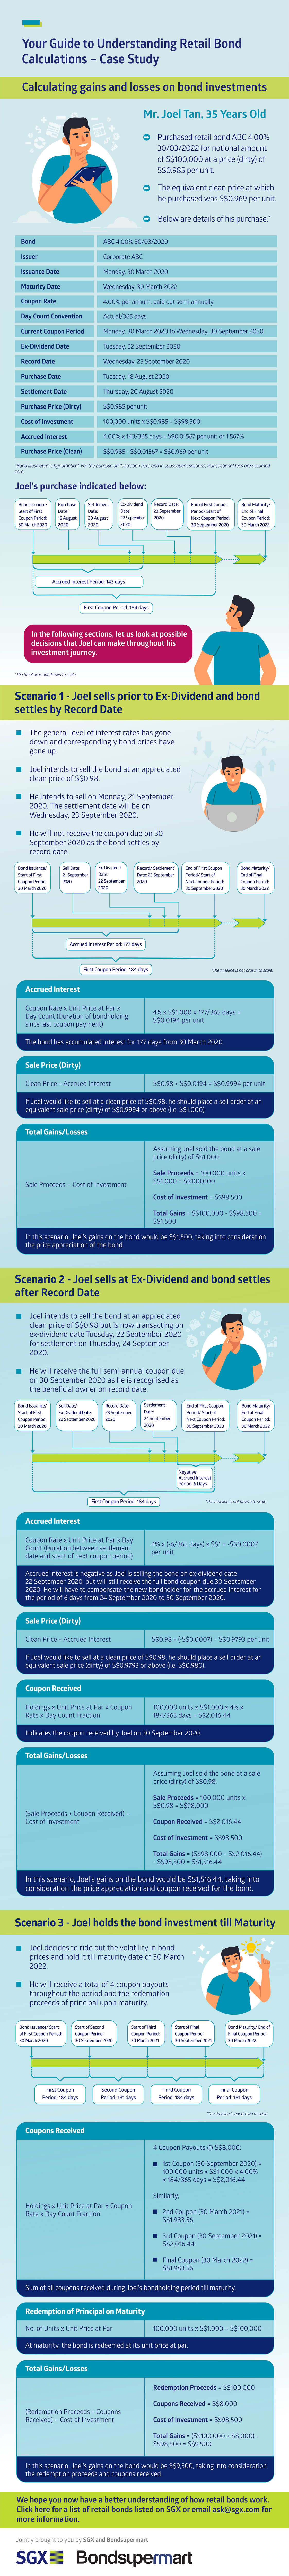 Bond Infographic 2 – Your Guide to Understanding Retail Bond Calculations